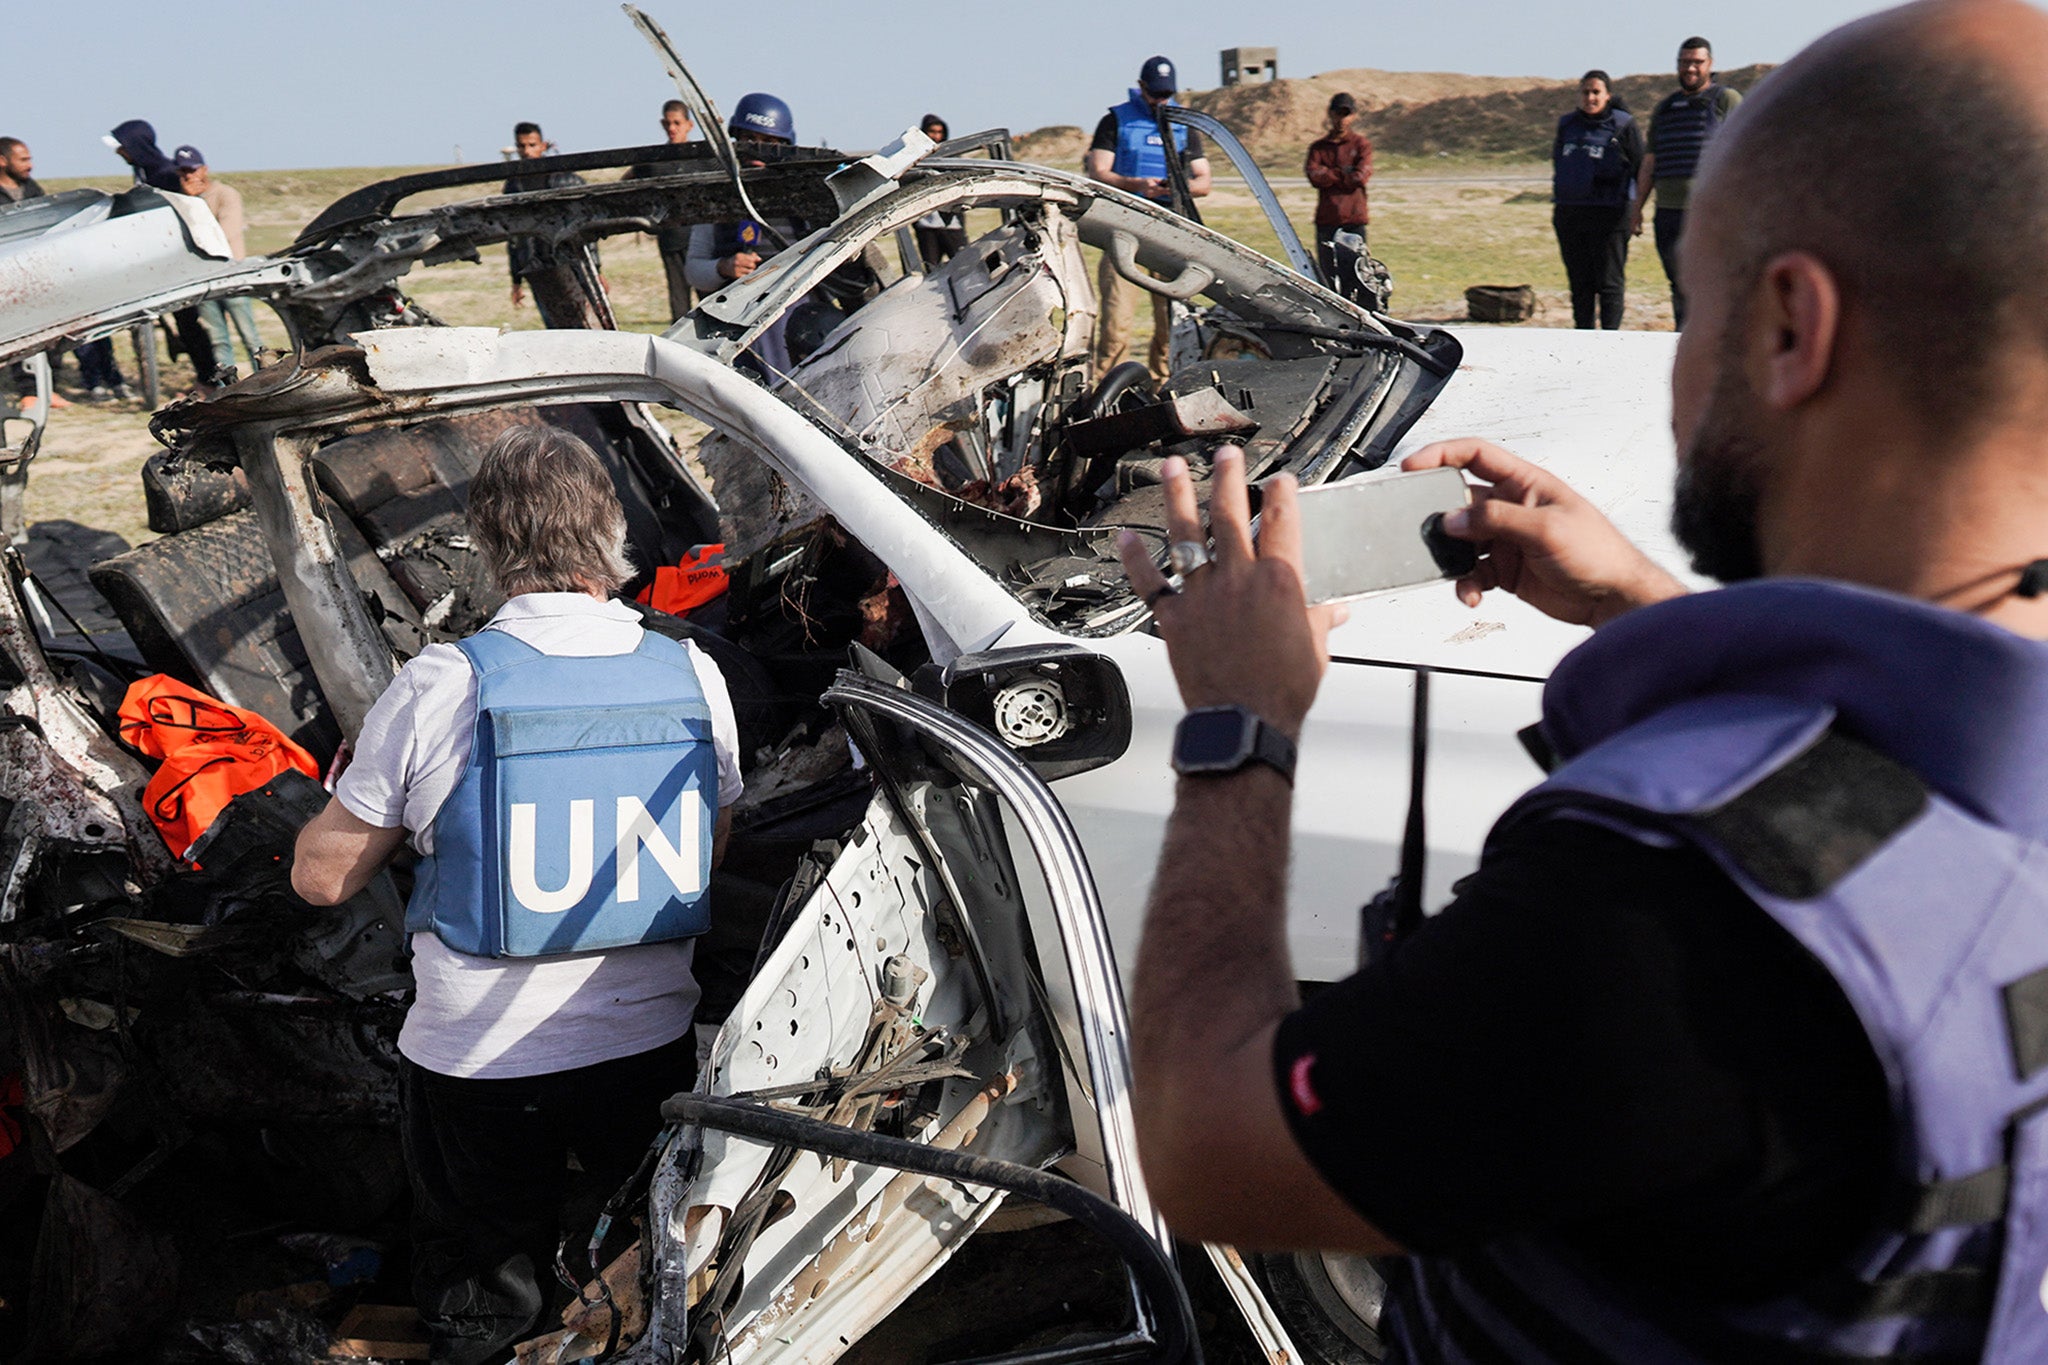 United Nations staff members inspect the wreckage of a car used by WCK